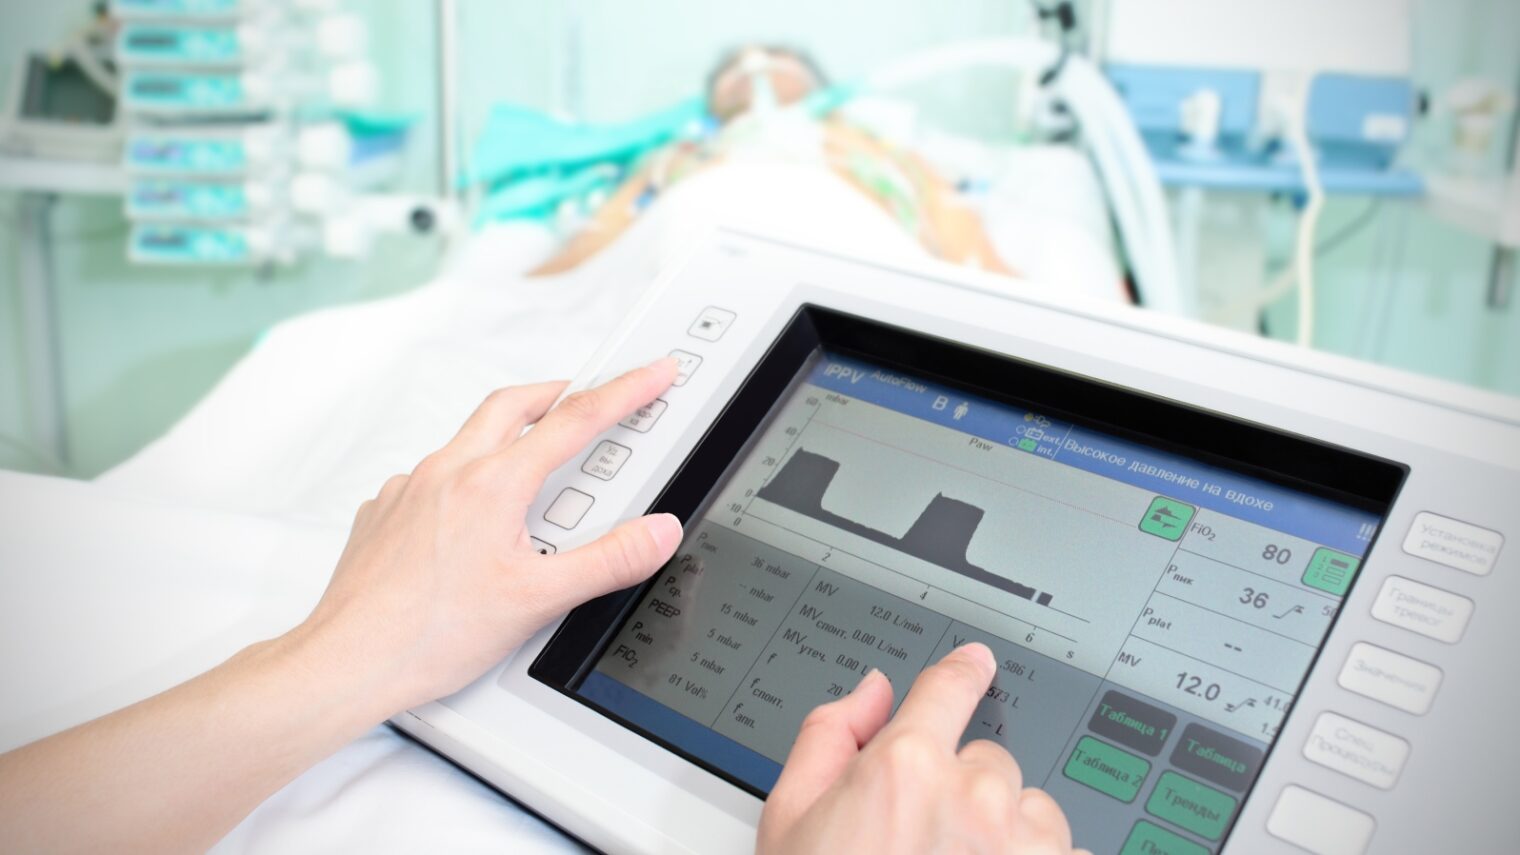 Illustrative photo of connected hospital medical devices via Shutterstock.com